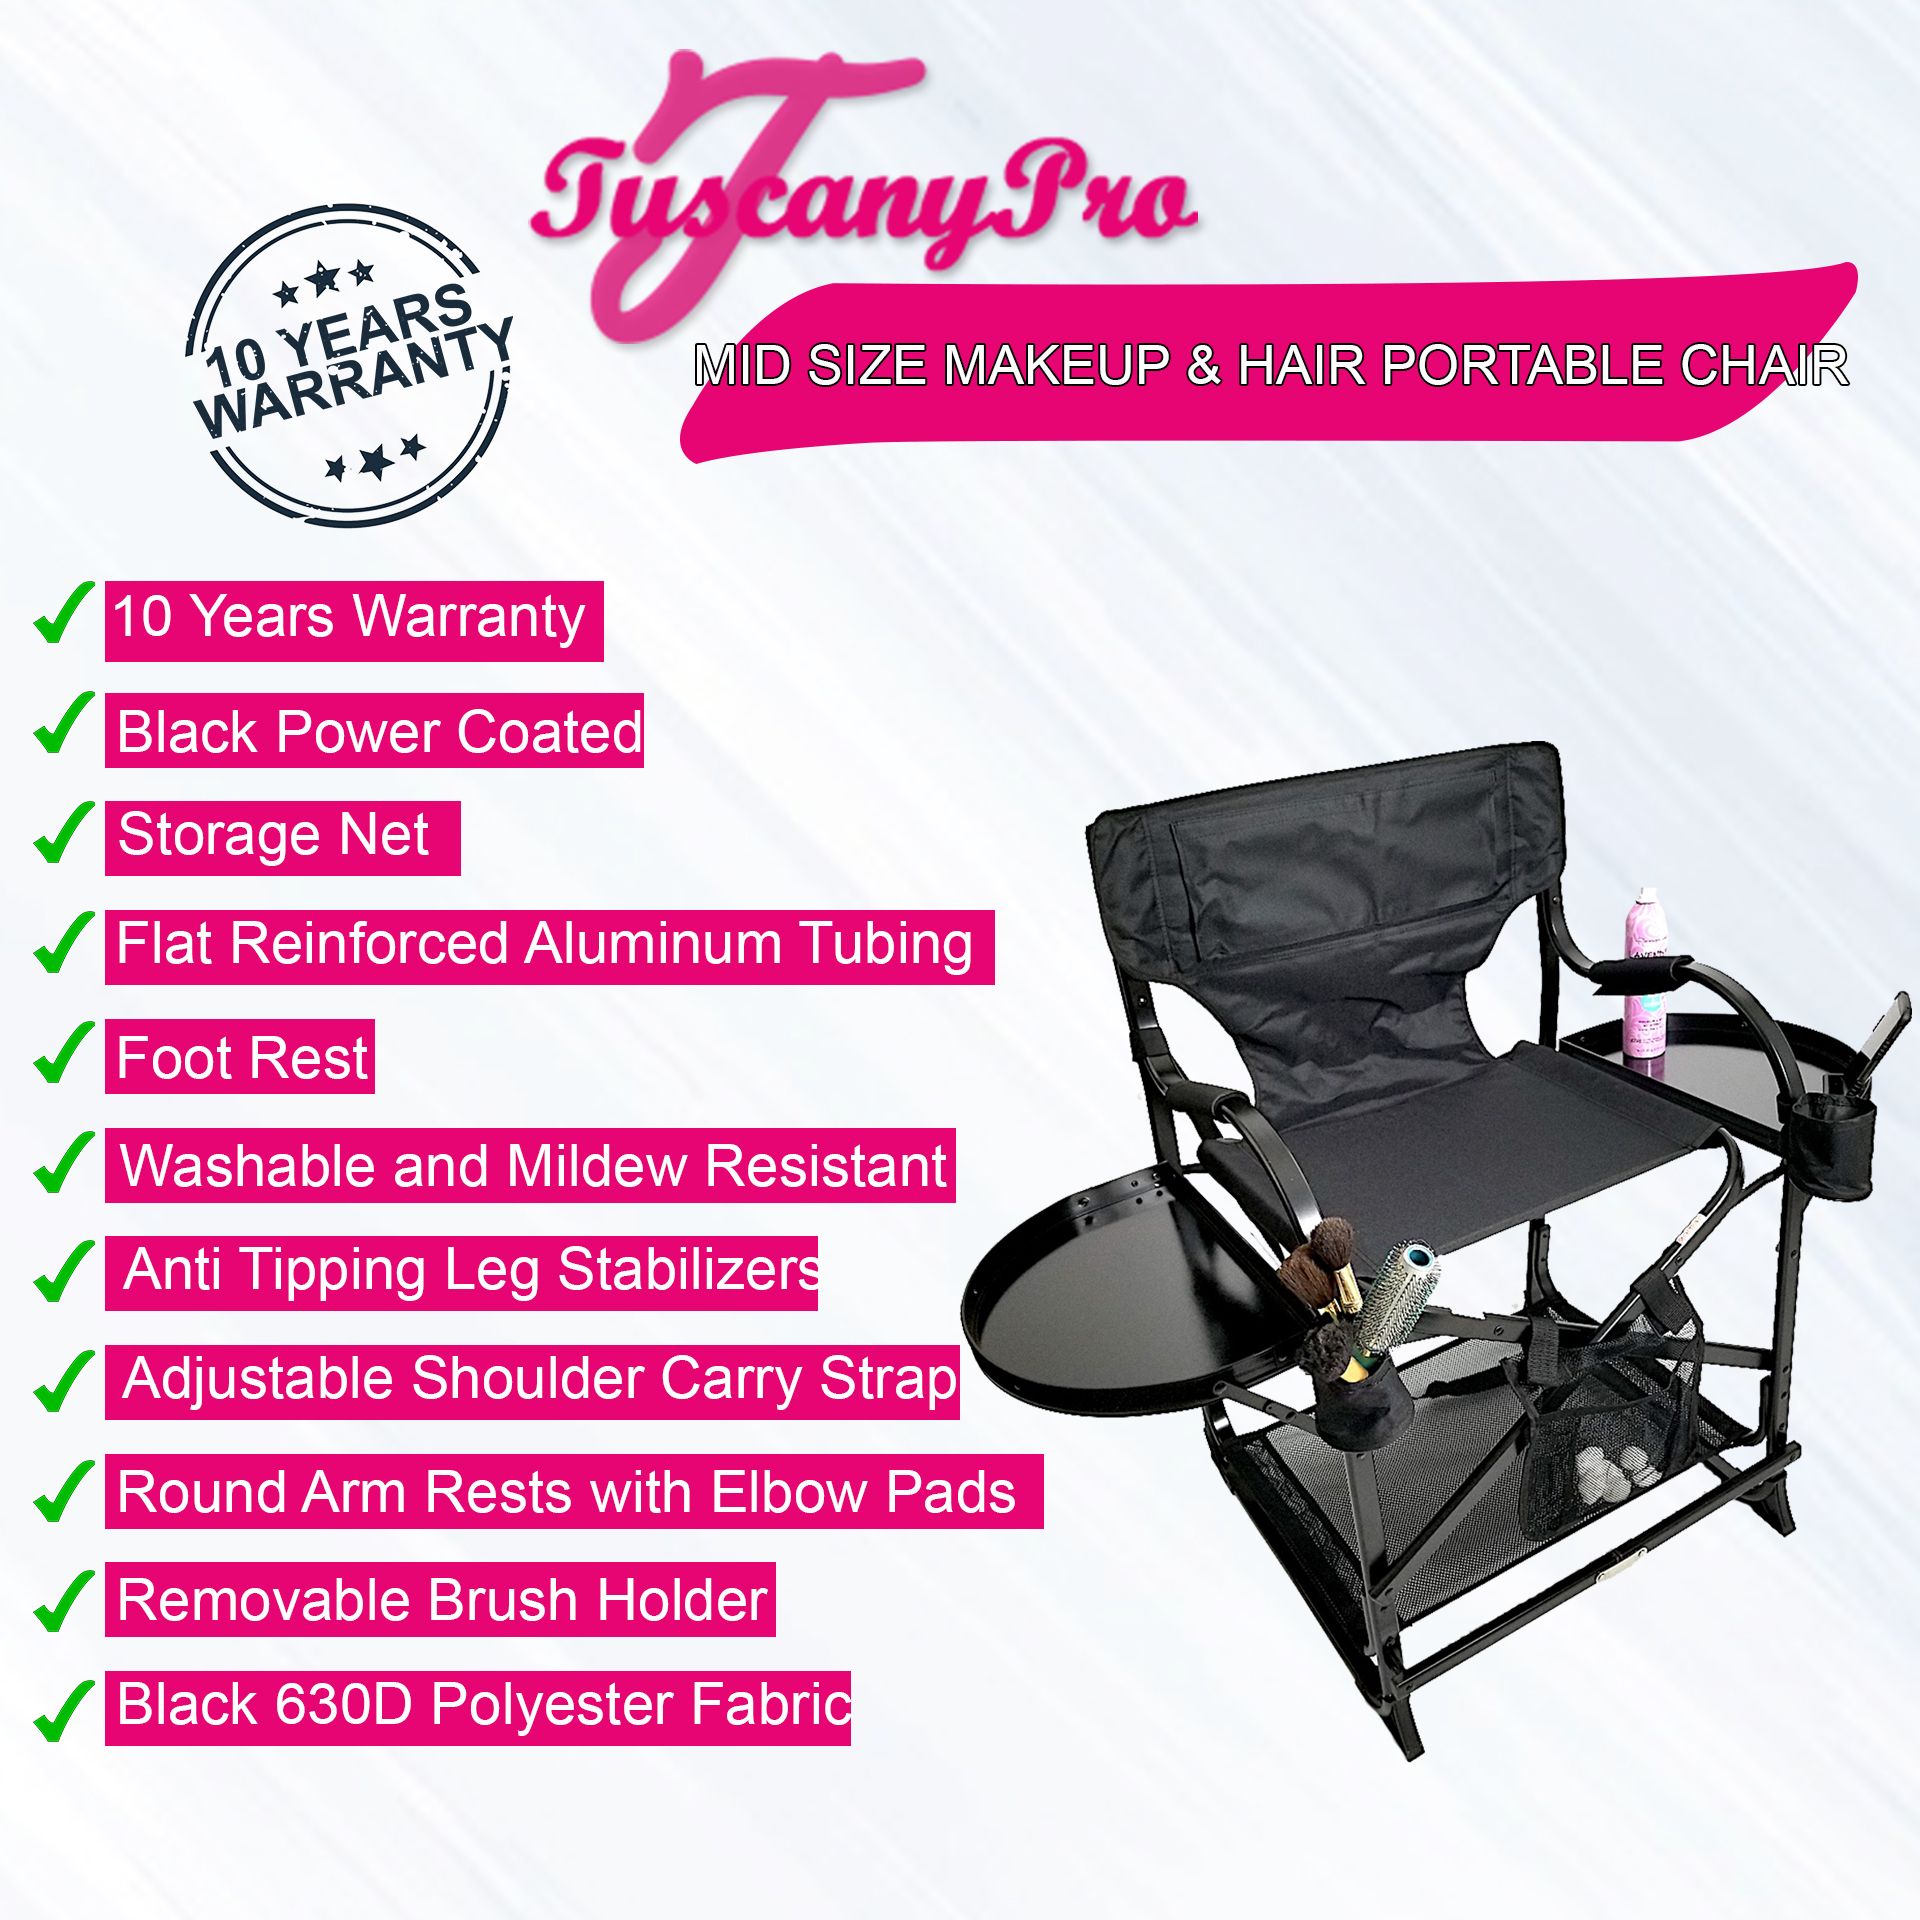 MID SIZE MAKEUP & HAIR PORTABLE CHAIR